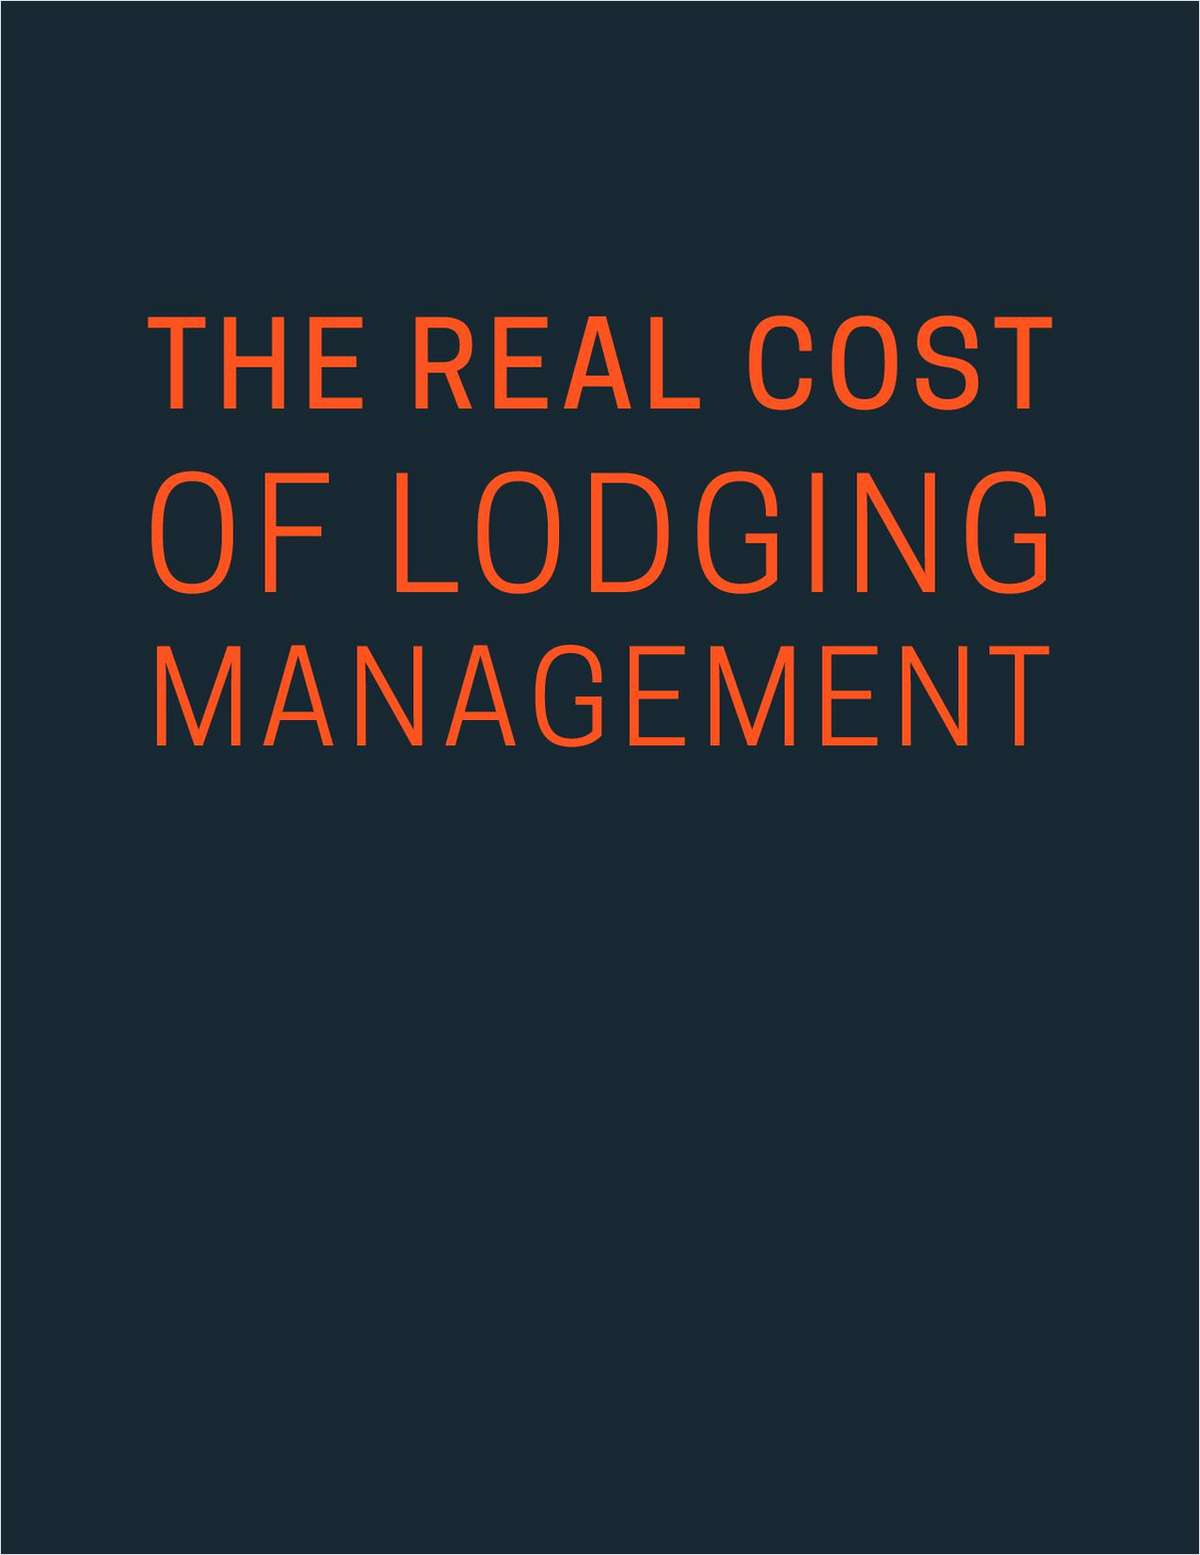 The Real Cost of Lodging Management